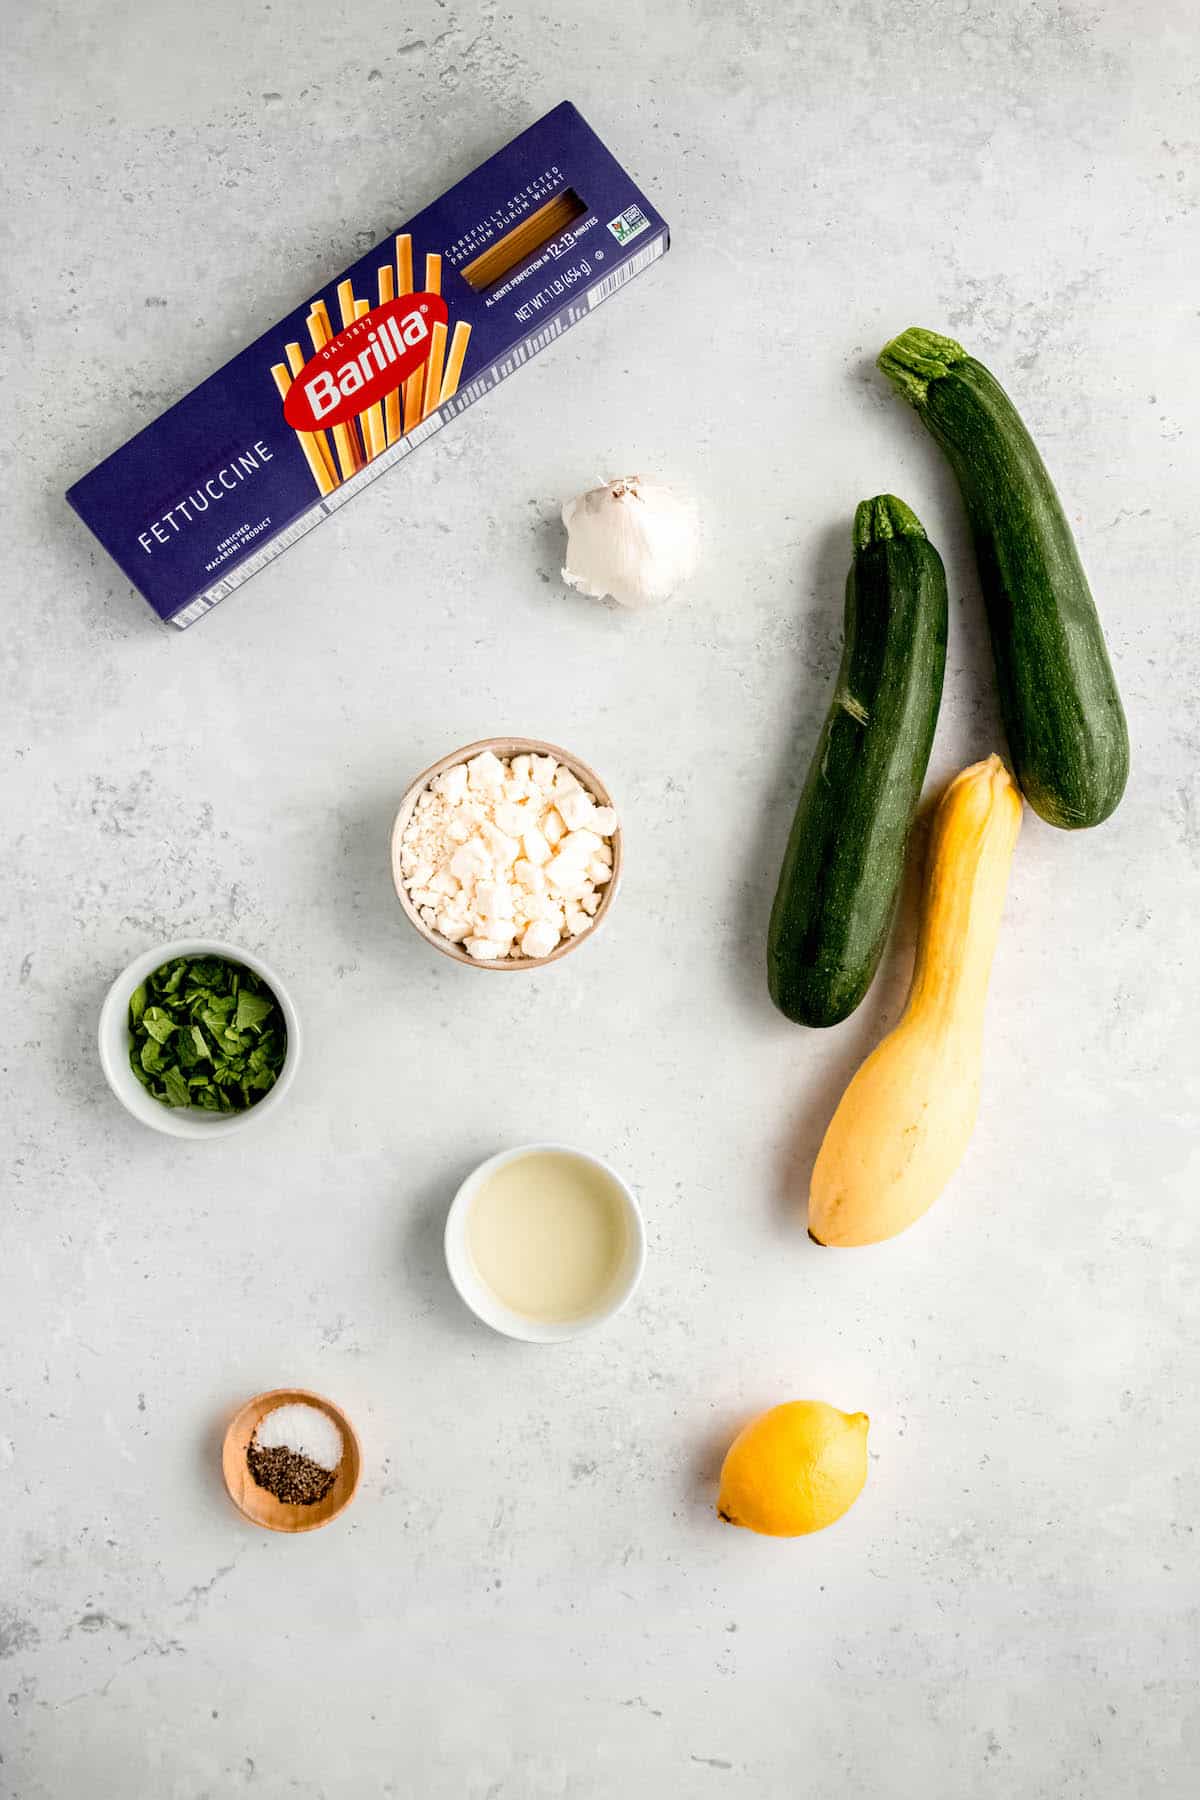 ingredients needed to make zucchini linguine summer pasta laid out ona. white table.